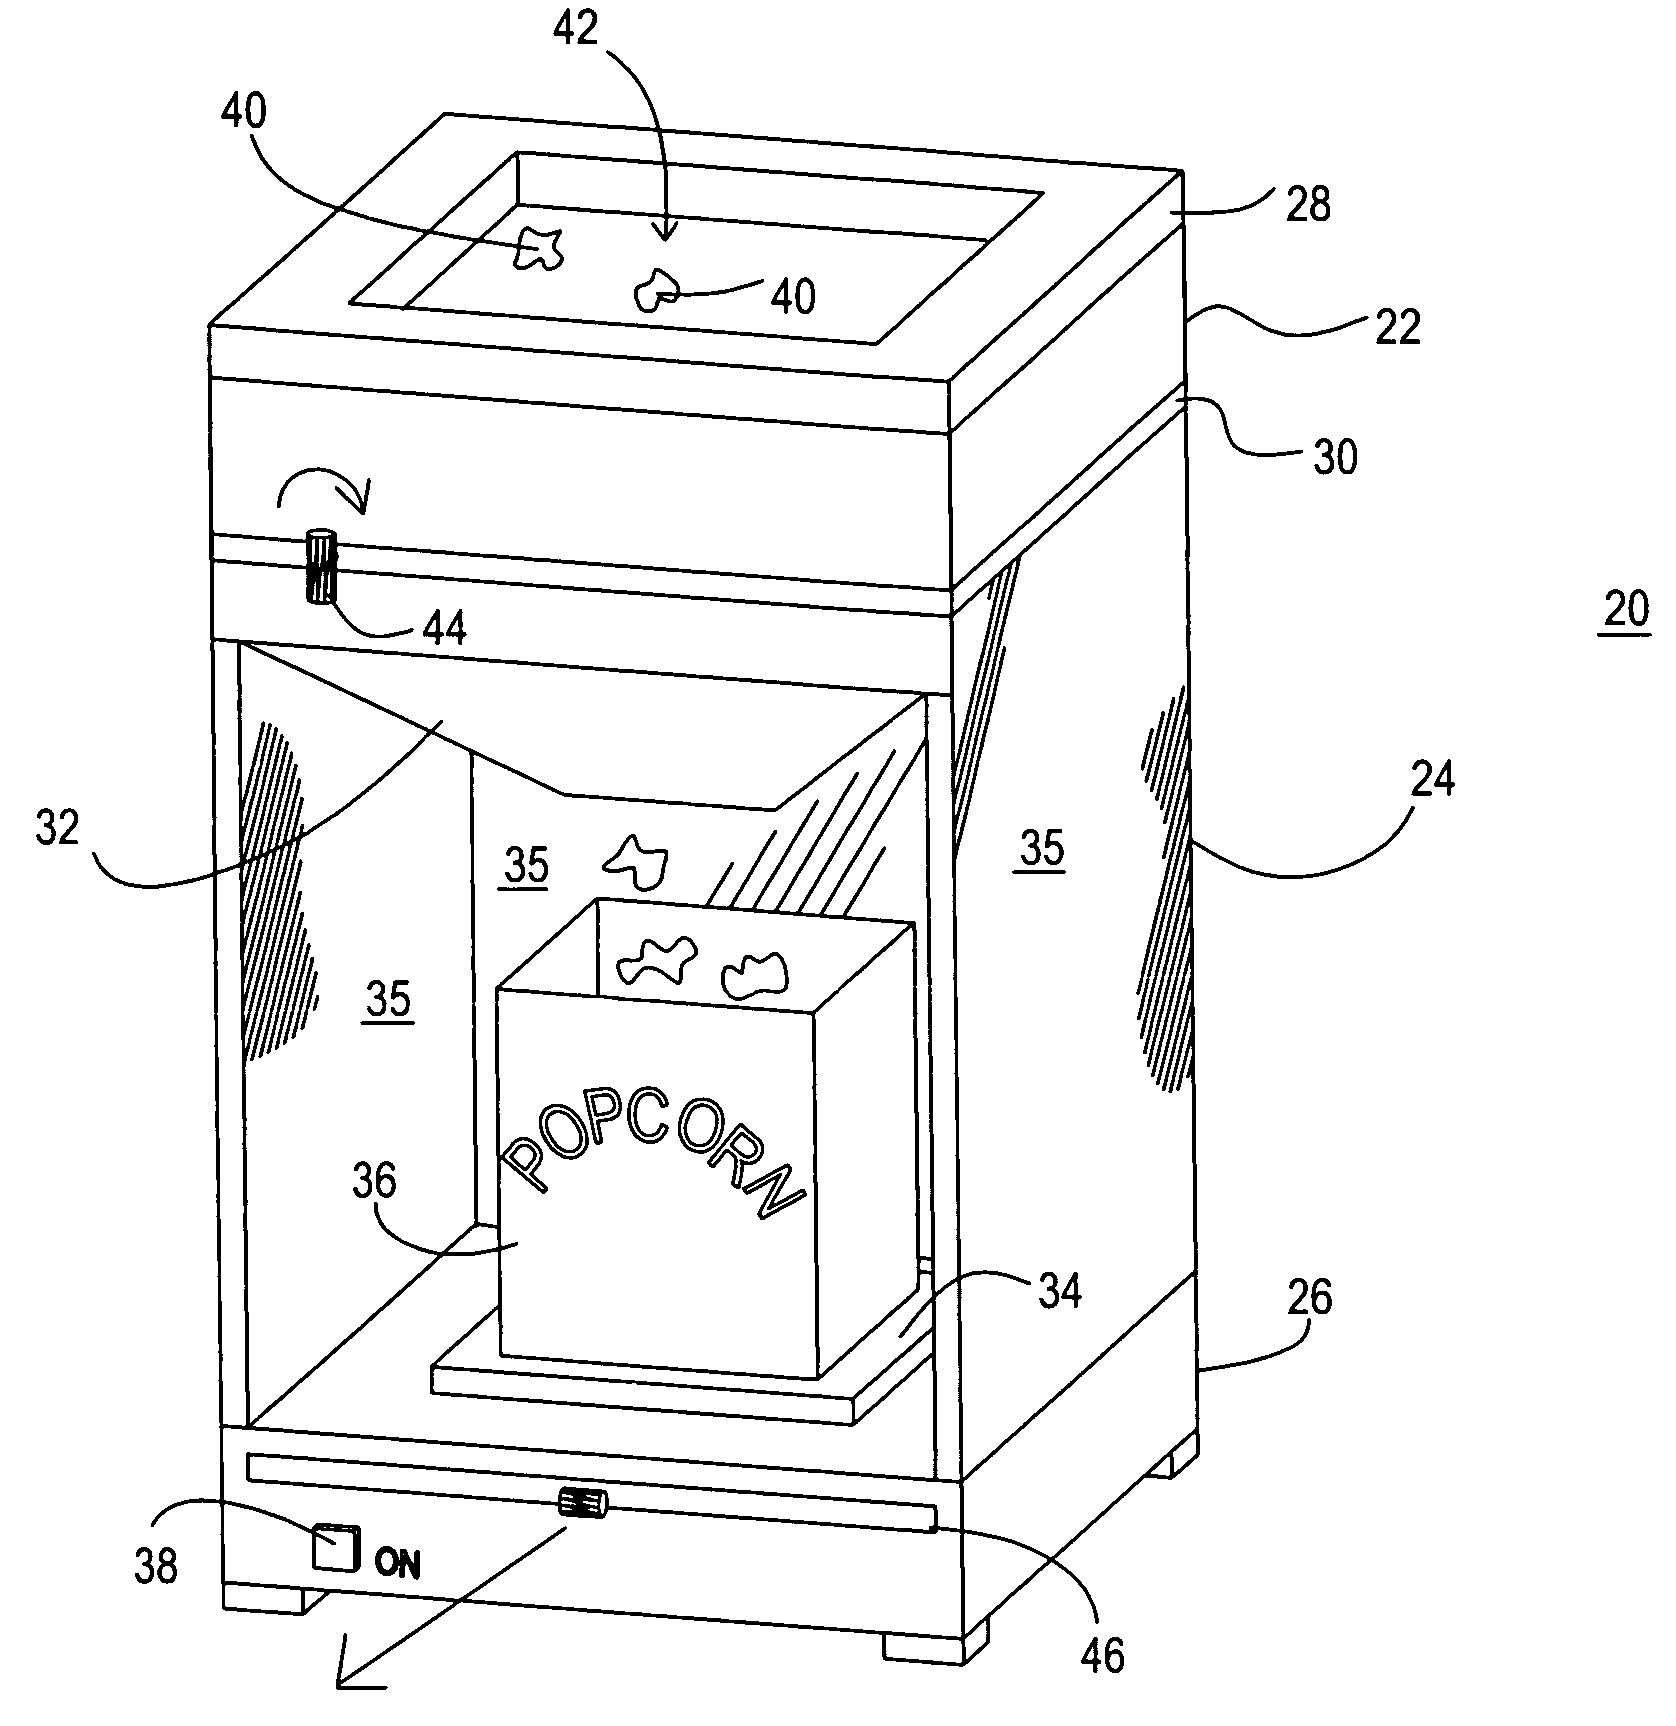 Food product flavoring apparatus